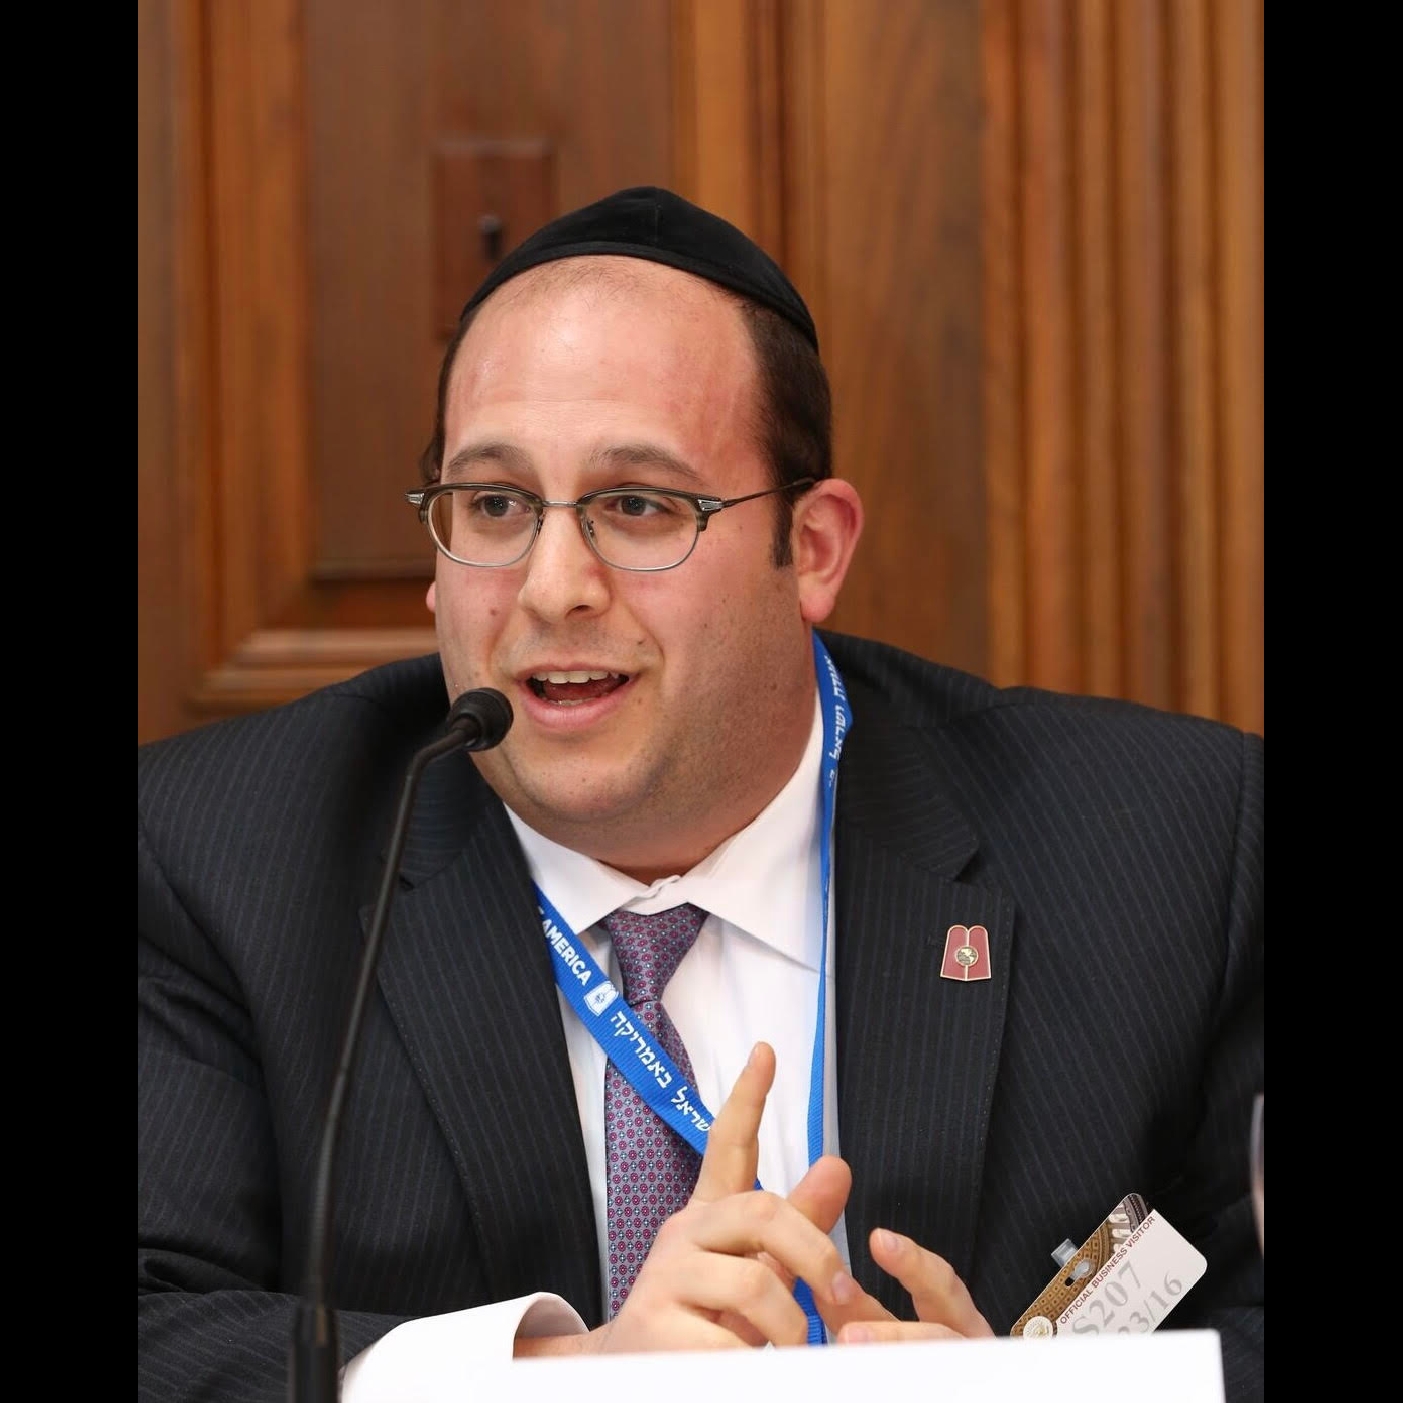 Talkline with Zev Brenner on challenging the Anti-Charedi Jewish bias of the New York Times with Rabbi Avi Schnall, director of Agudath Israel's NJ office.